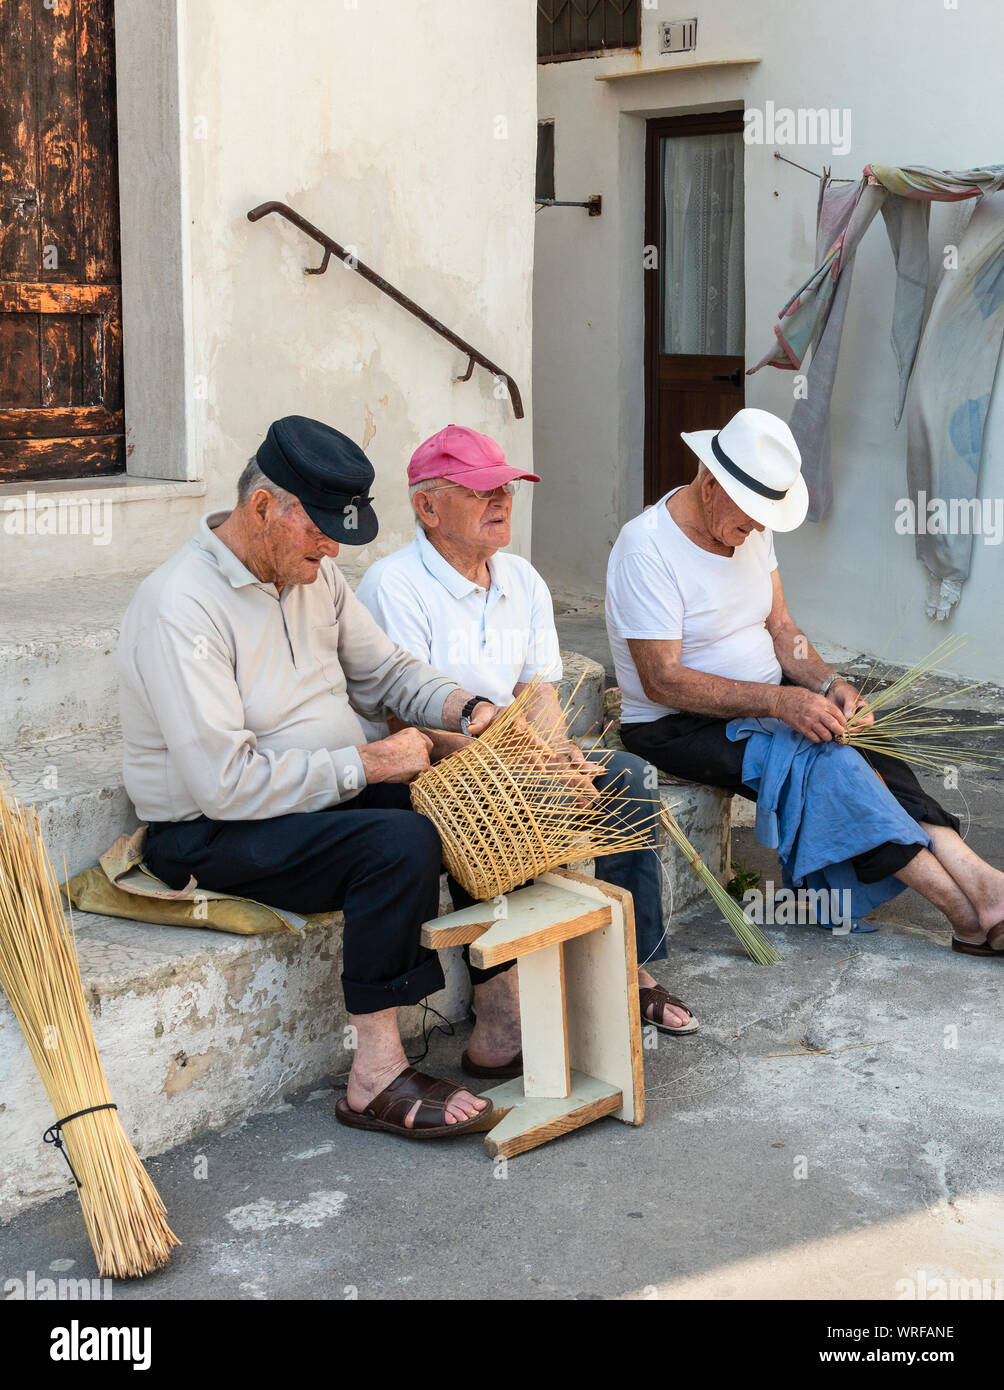 Fishing traps, known as 'Nasse', and baskets being made in the Street in Gallipoli old town, Puglia, Italy. Stock Photo